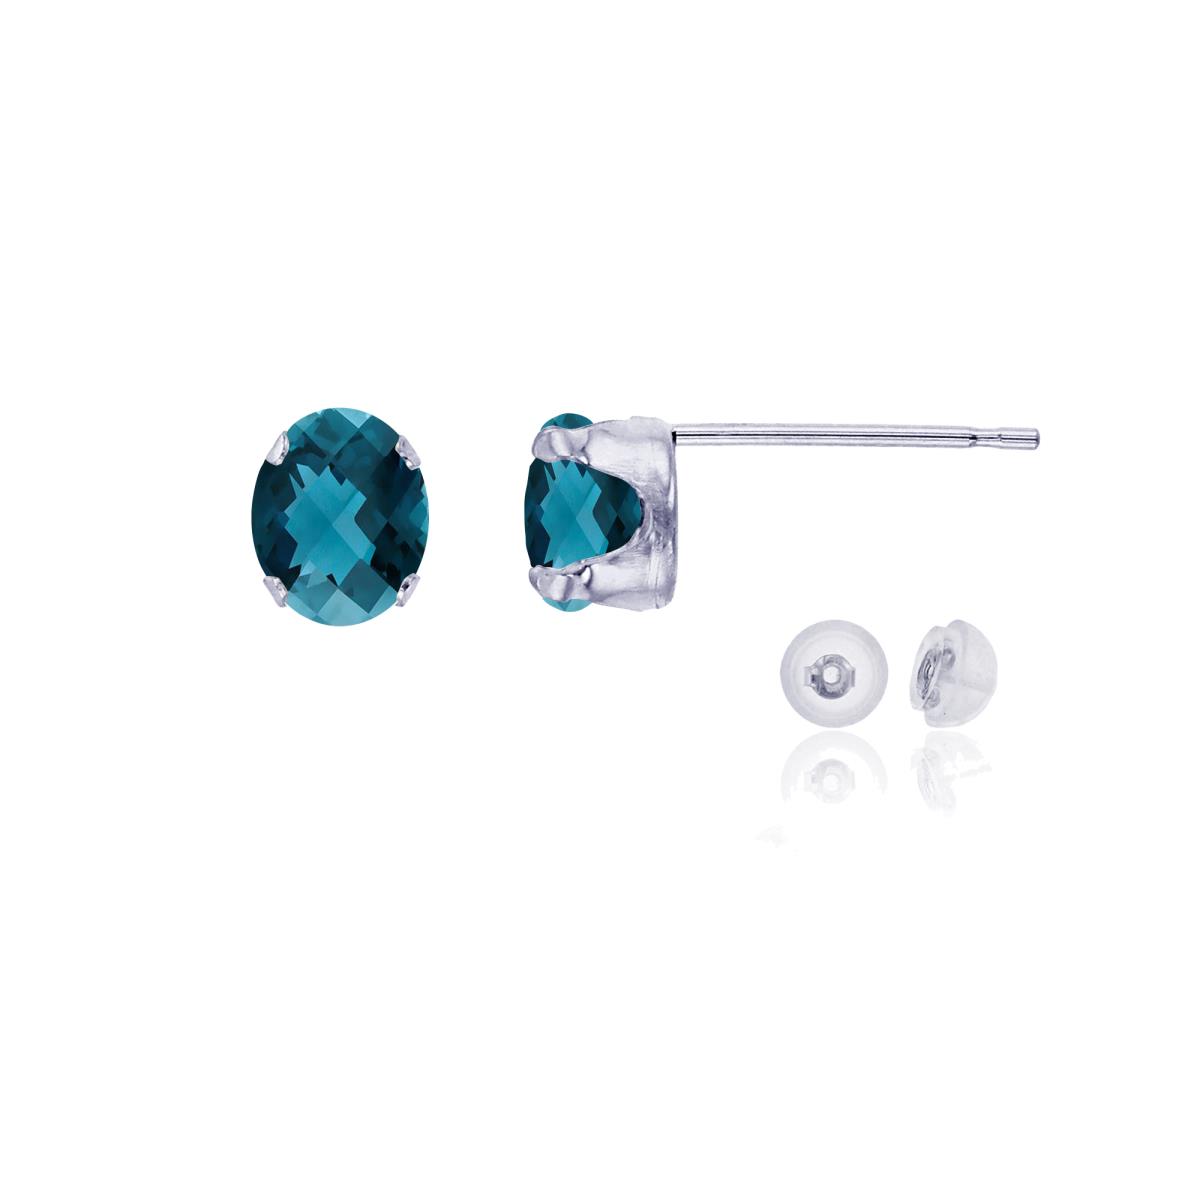 10K White Gold 6x4mm Oval London Blue Topaz Stud Earring with Silicone Back